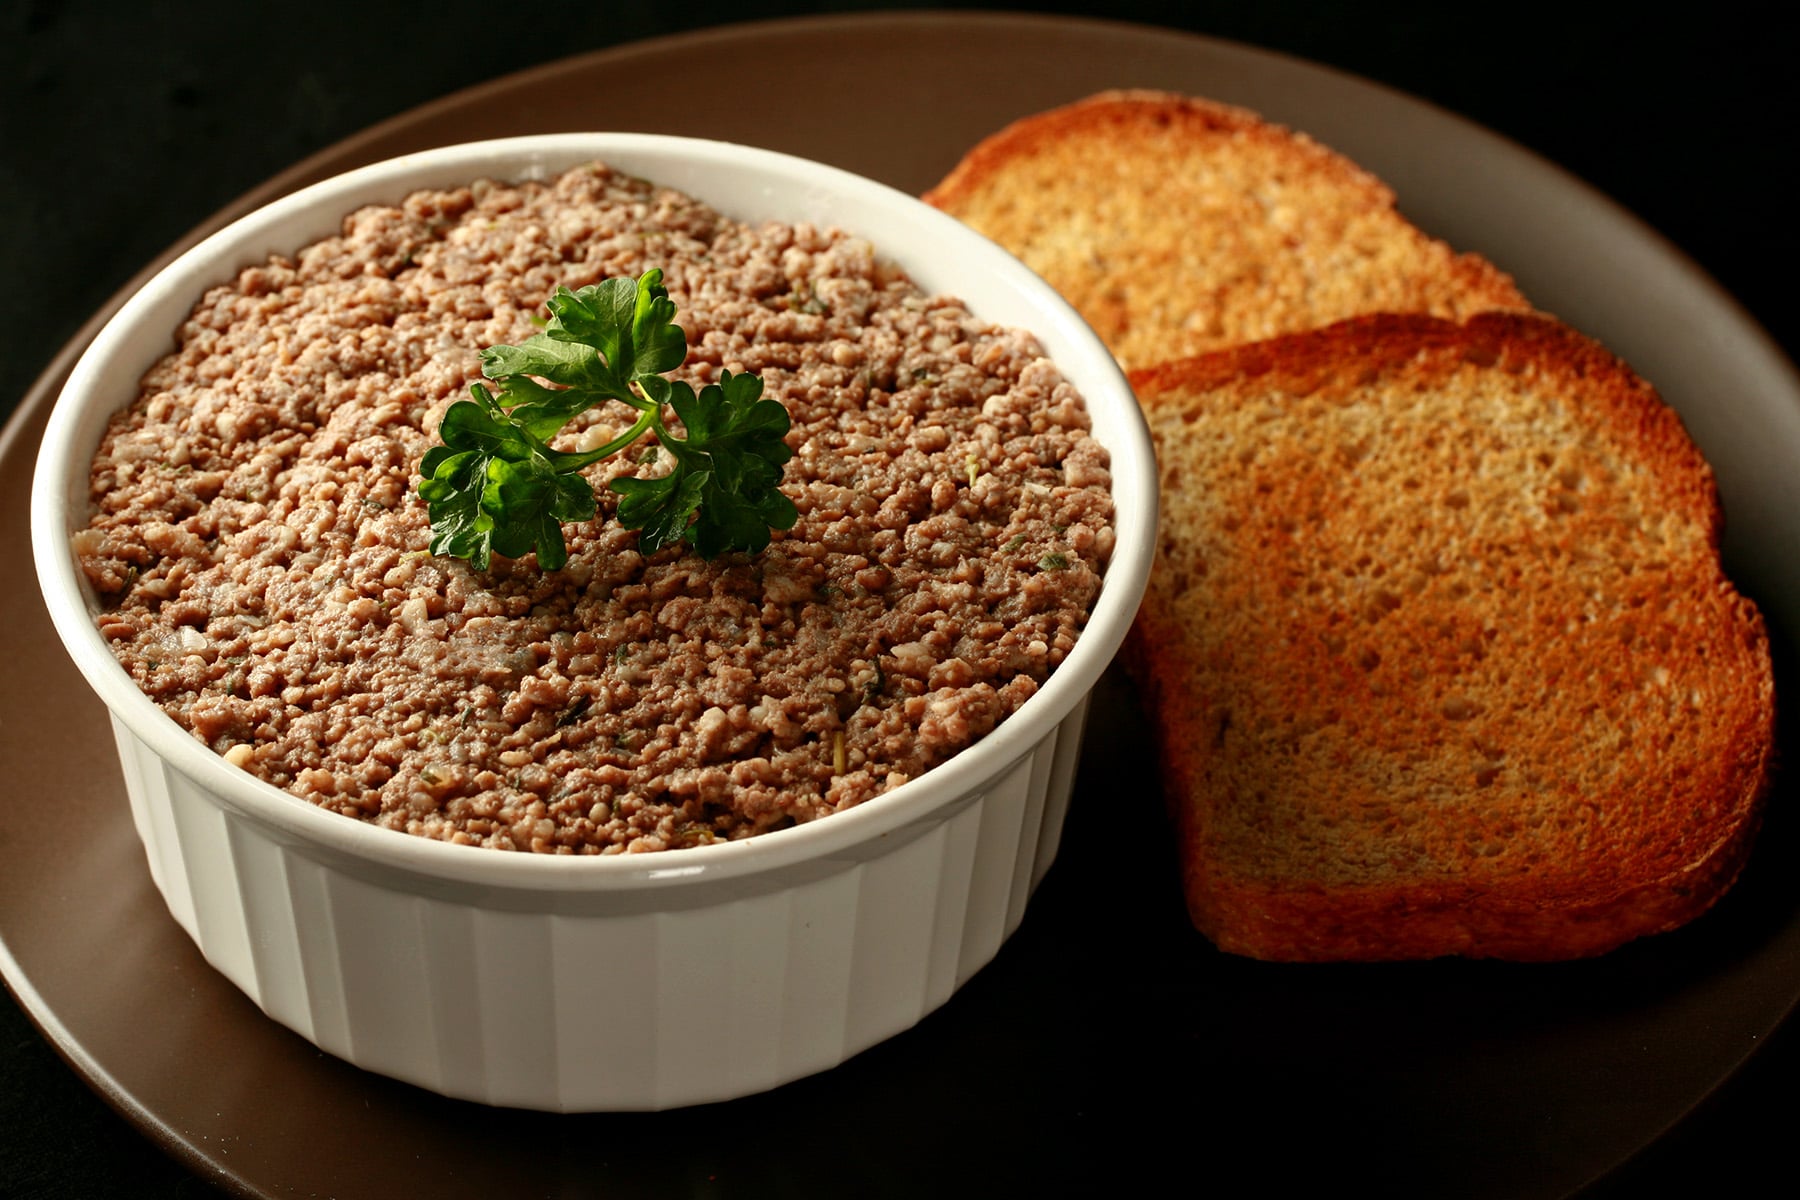 A pot of cretons - a French Canadian pork pate - in a small white ramekin, next to slices of toast.